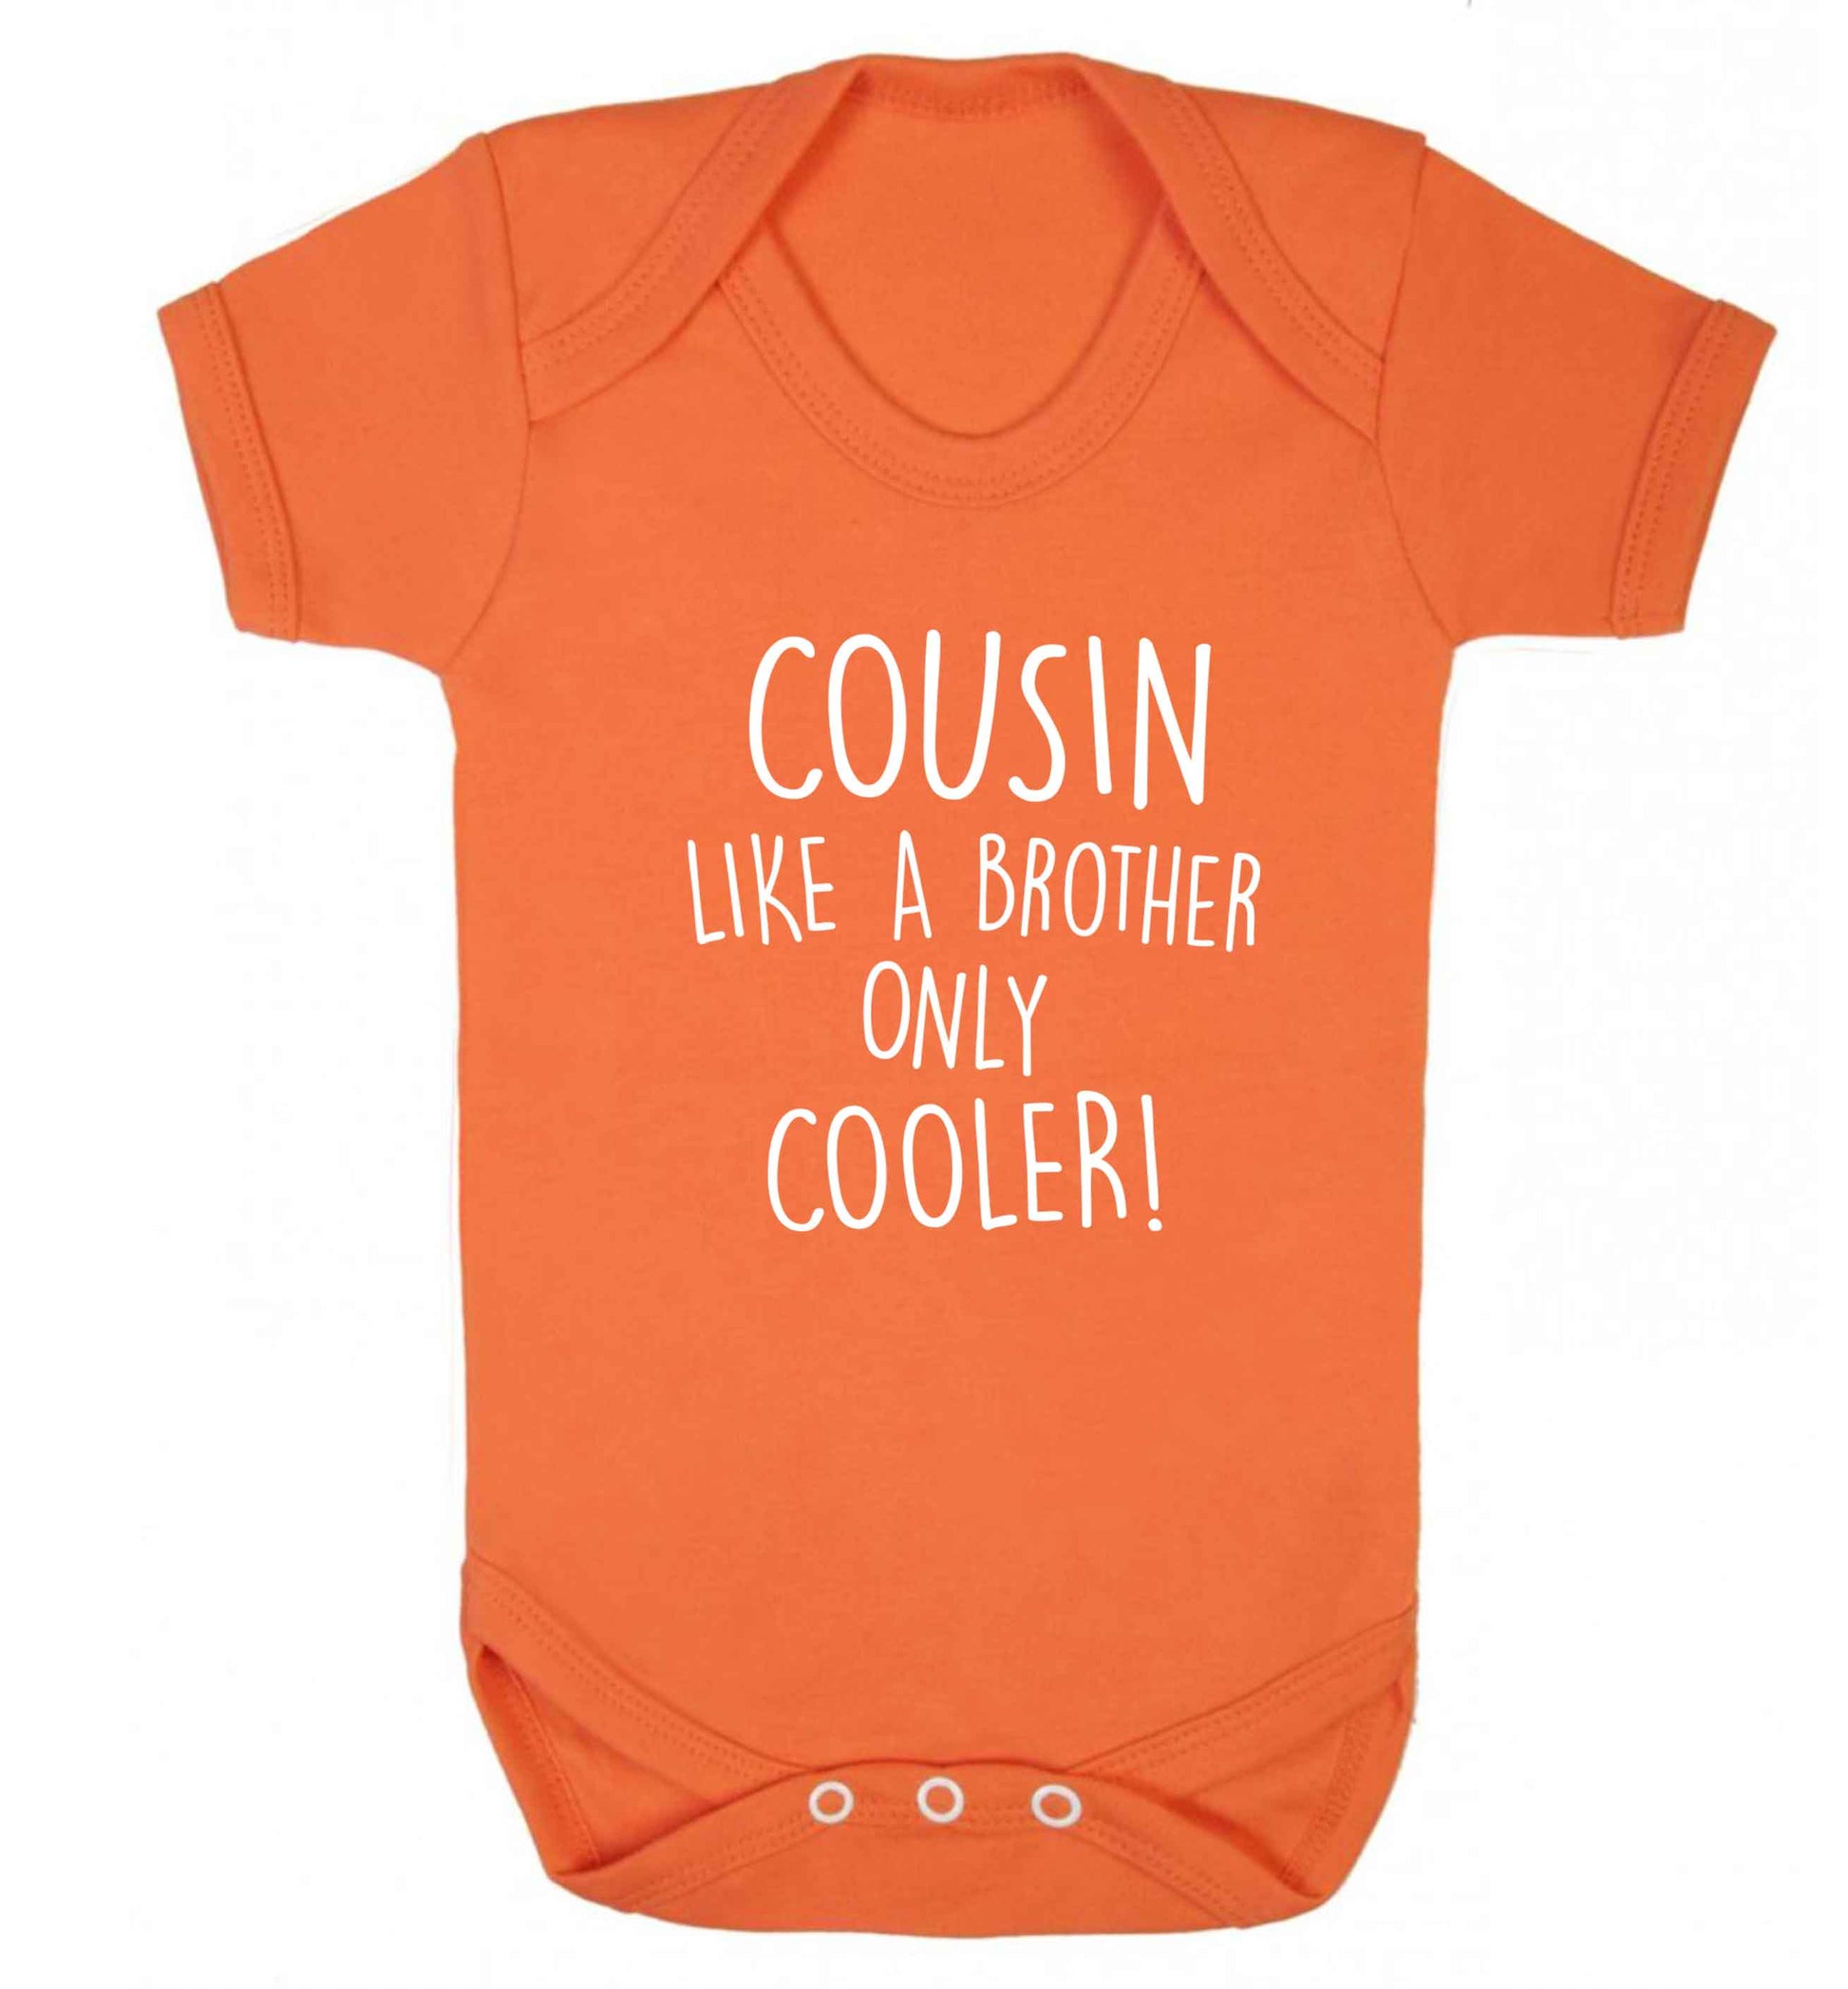 Cousin like a brother only cooler baby vest orange 18-24 months